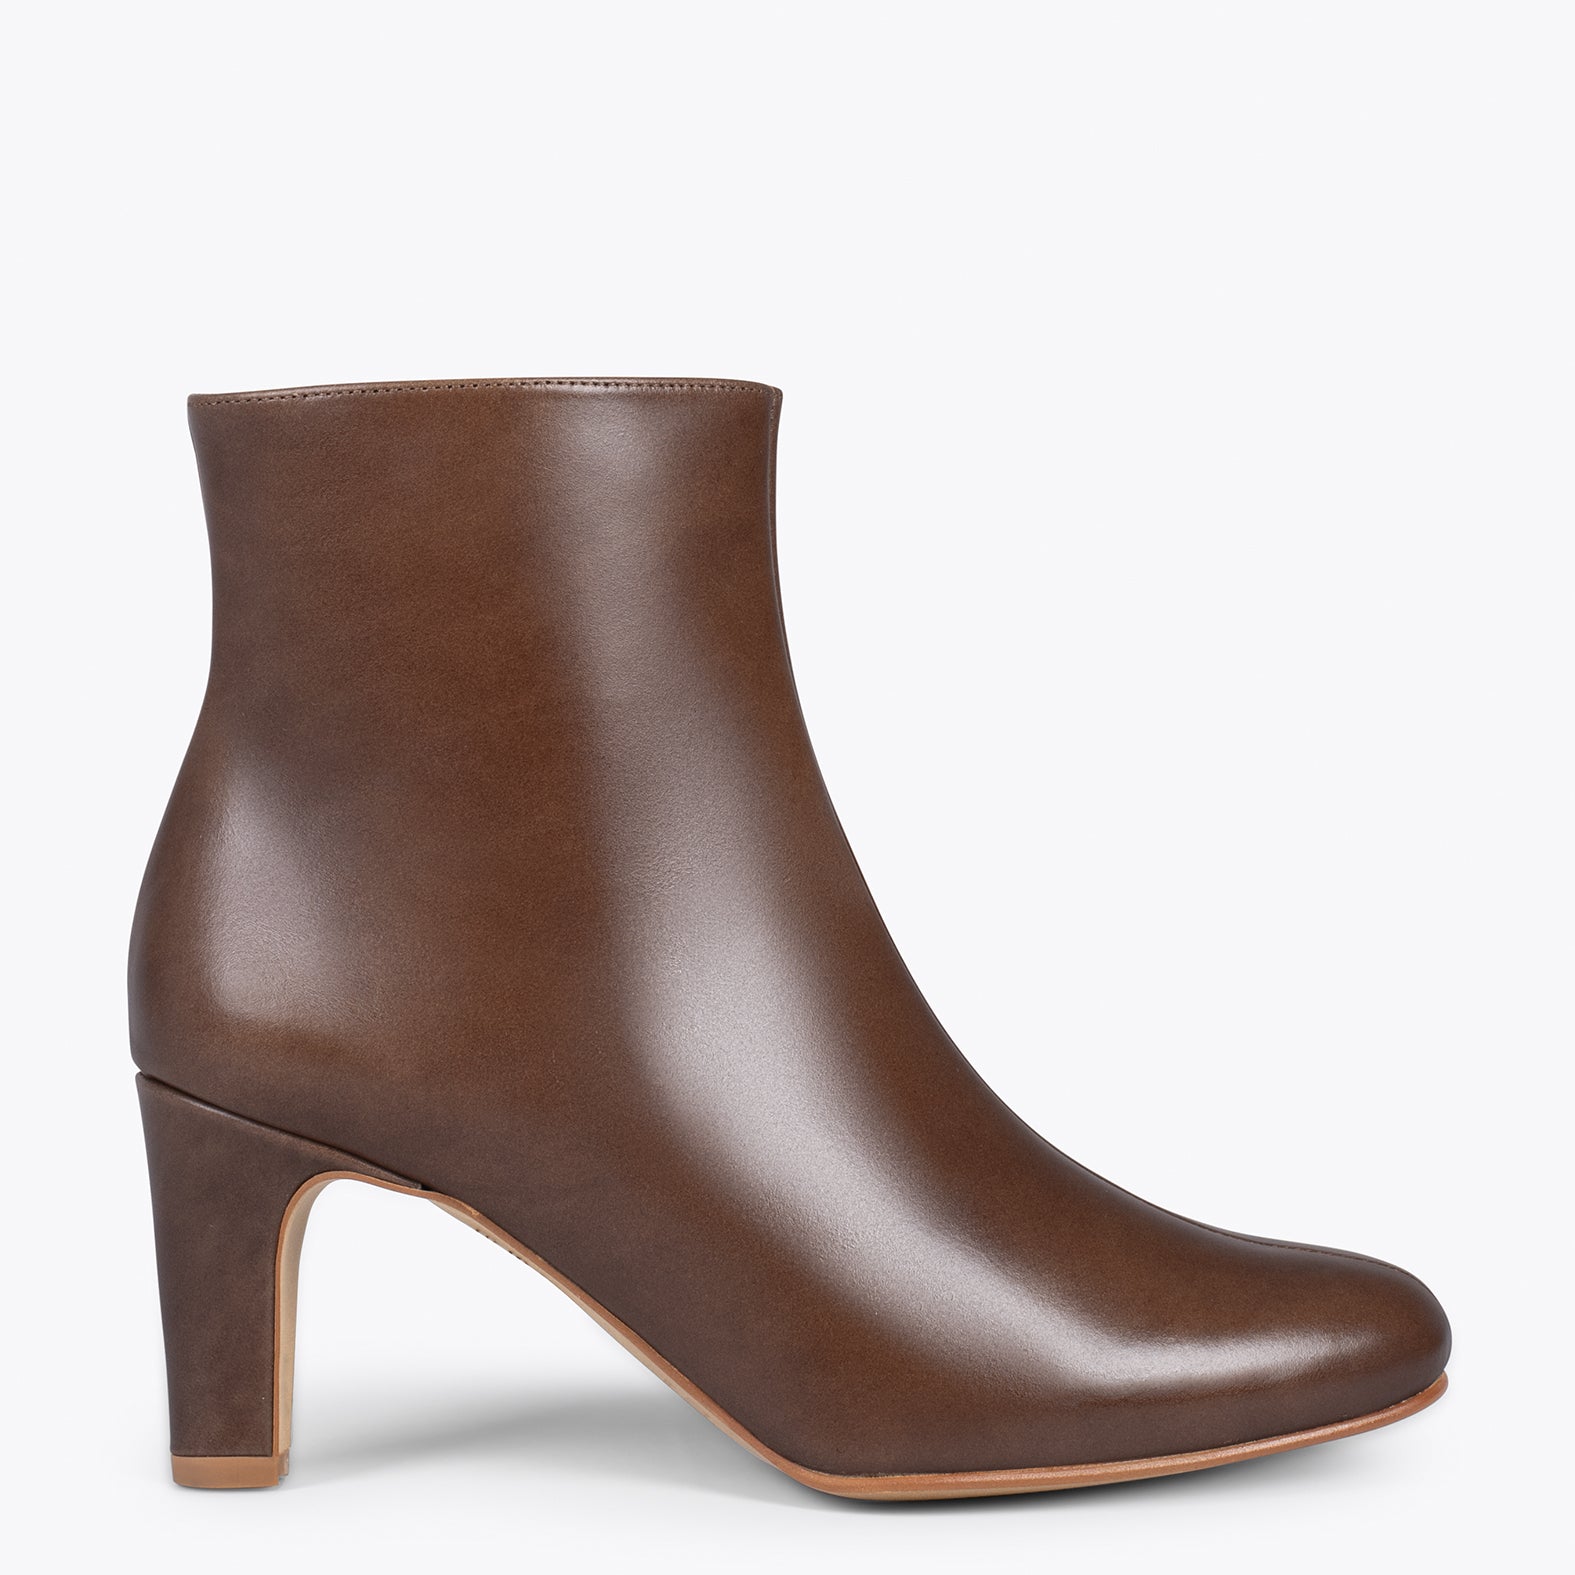 DAILY – BROWN leather bootie